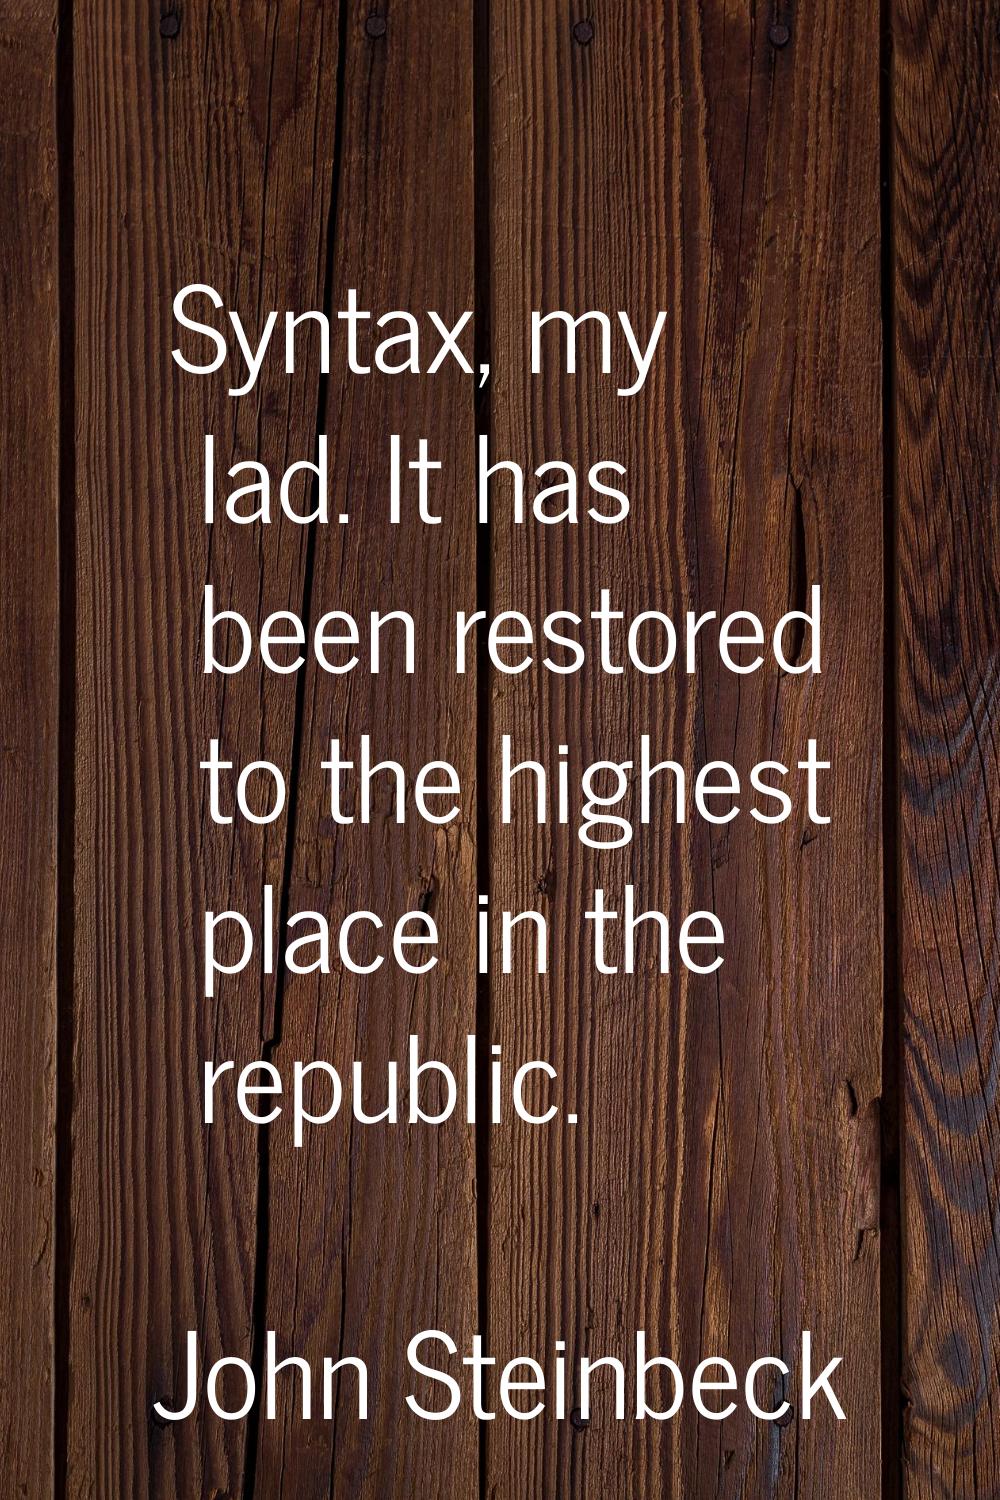 Syntax, my lad. It has been restored to the highest place in the republic.